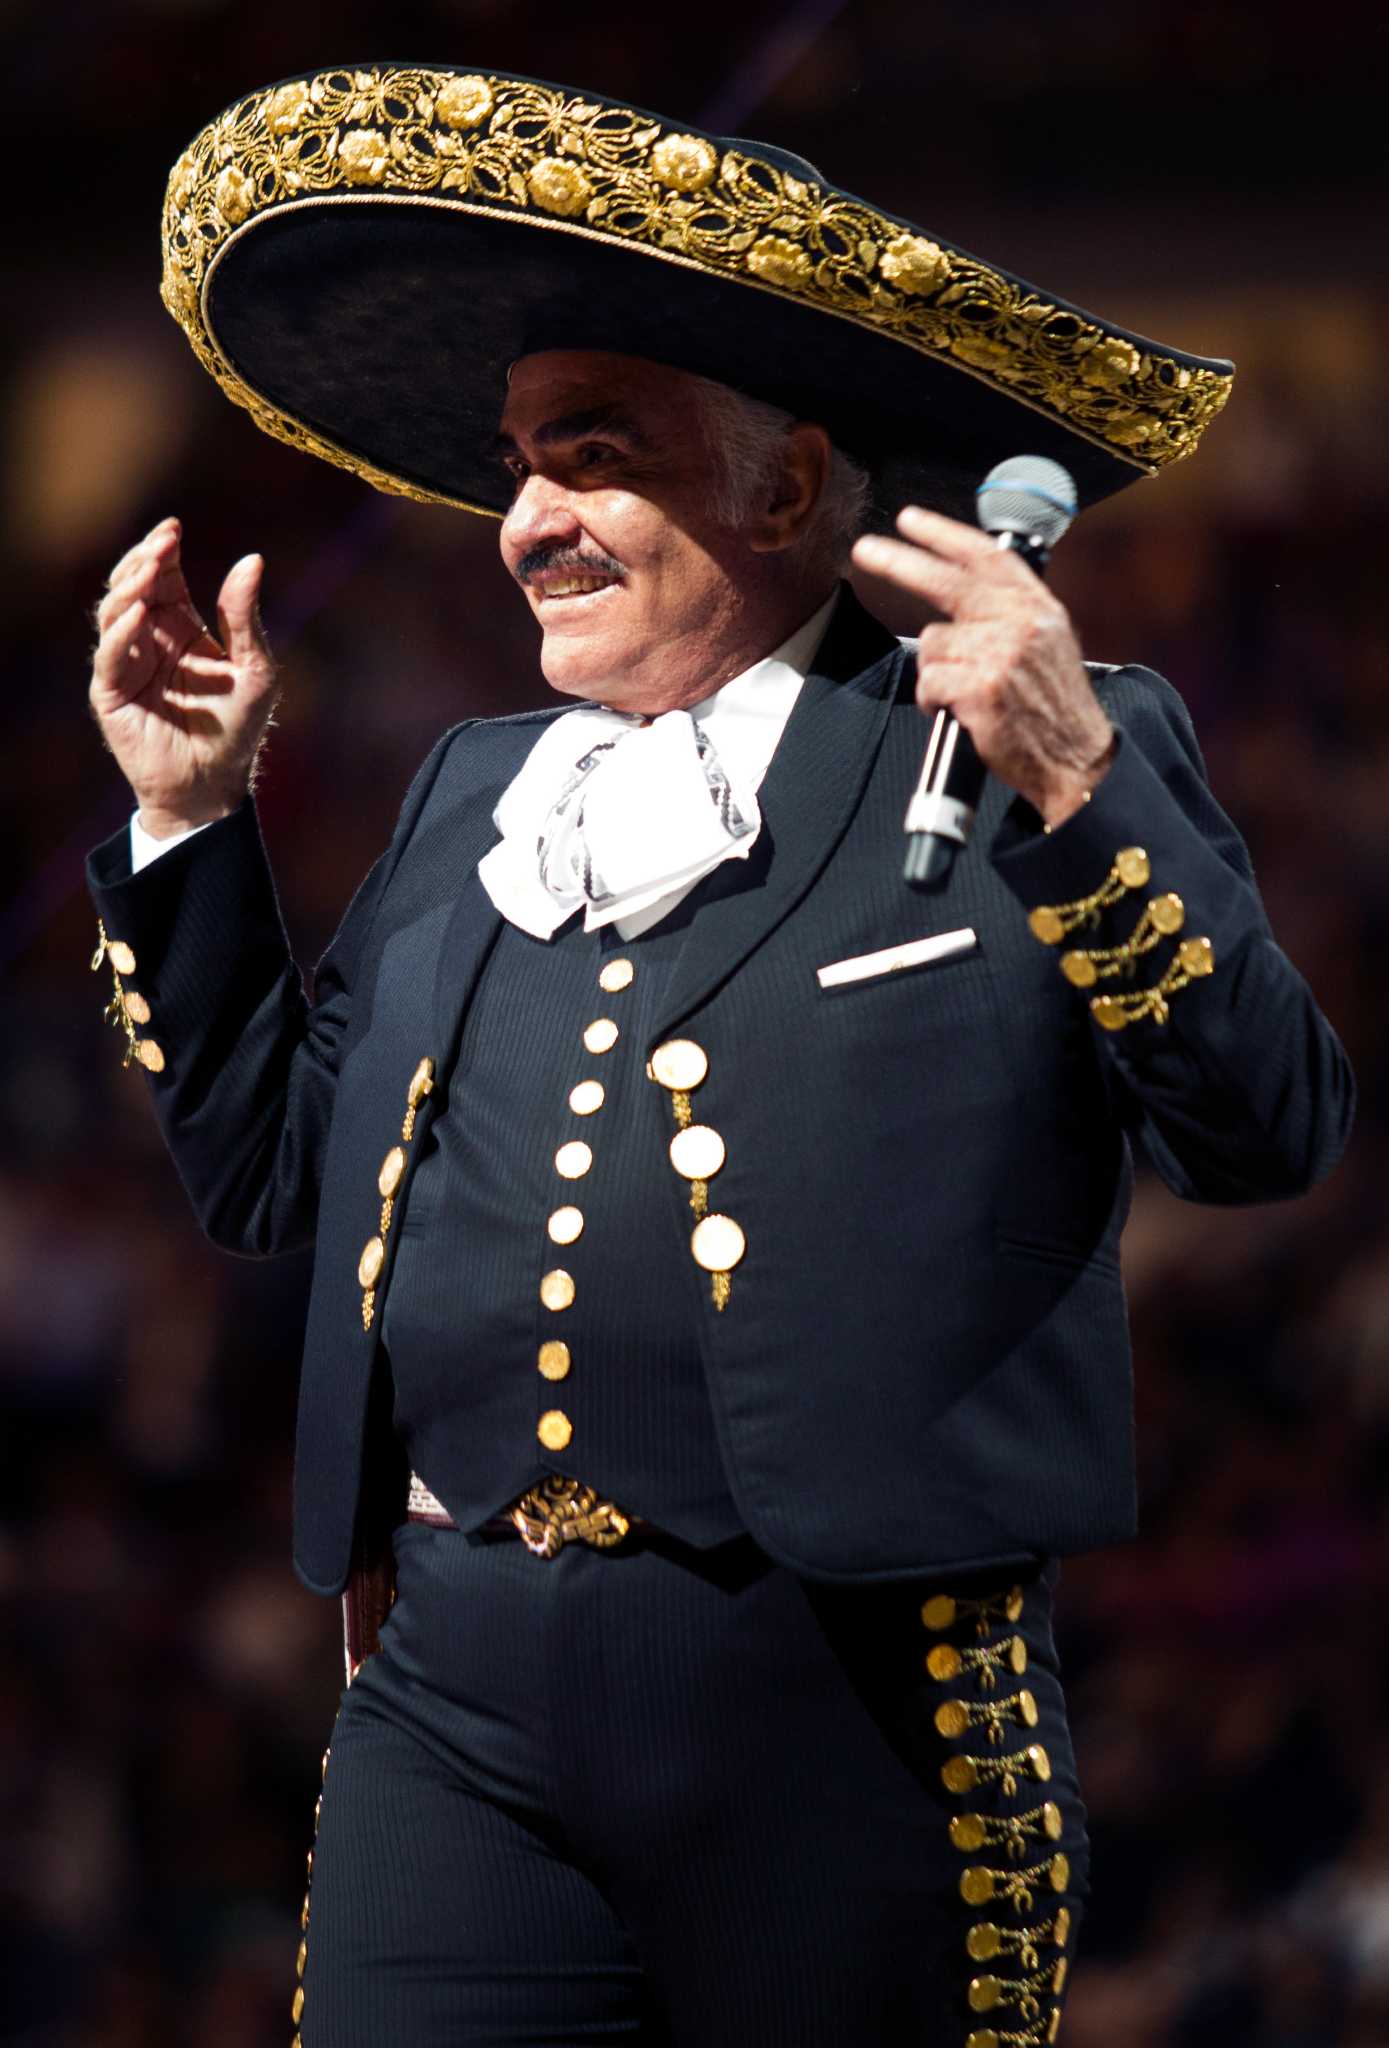 who did vicente fernandez tour with